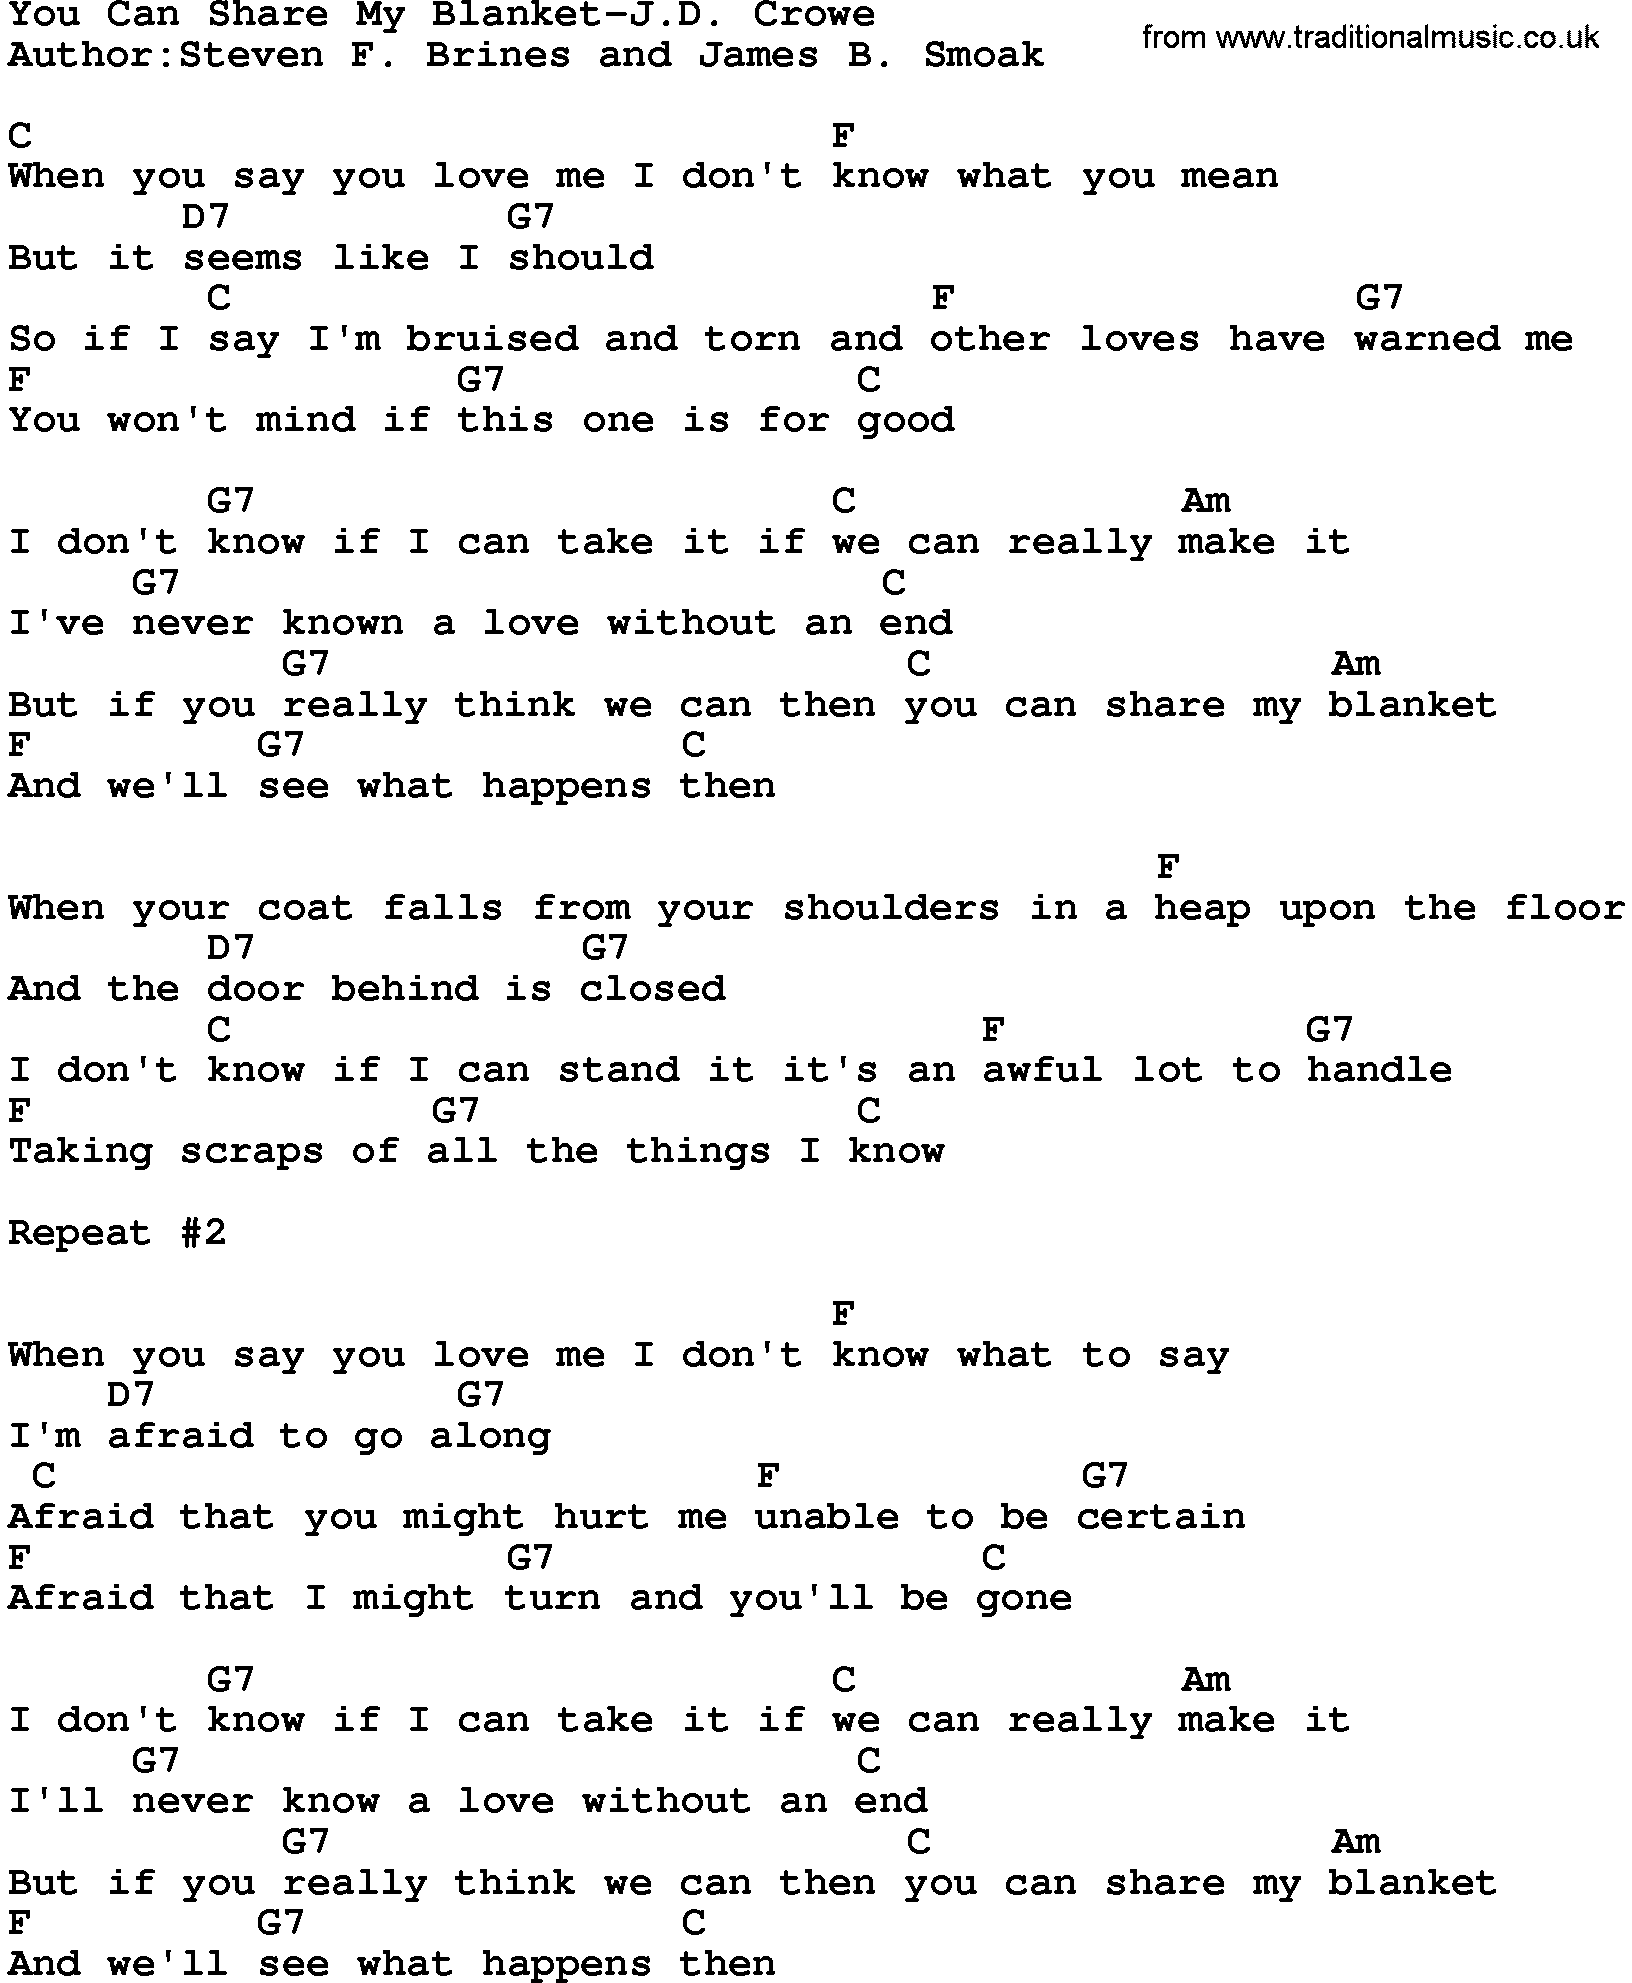 Country music song: You Can Share My Blanket-Jd Crowe lyrics and chords